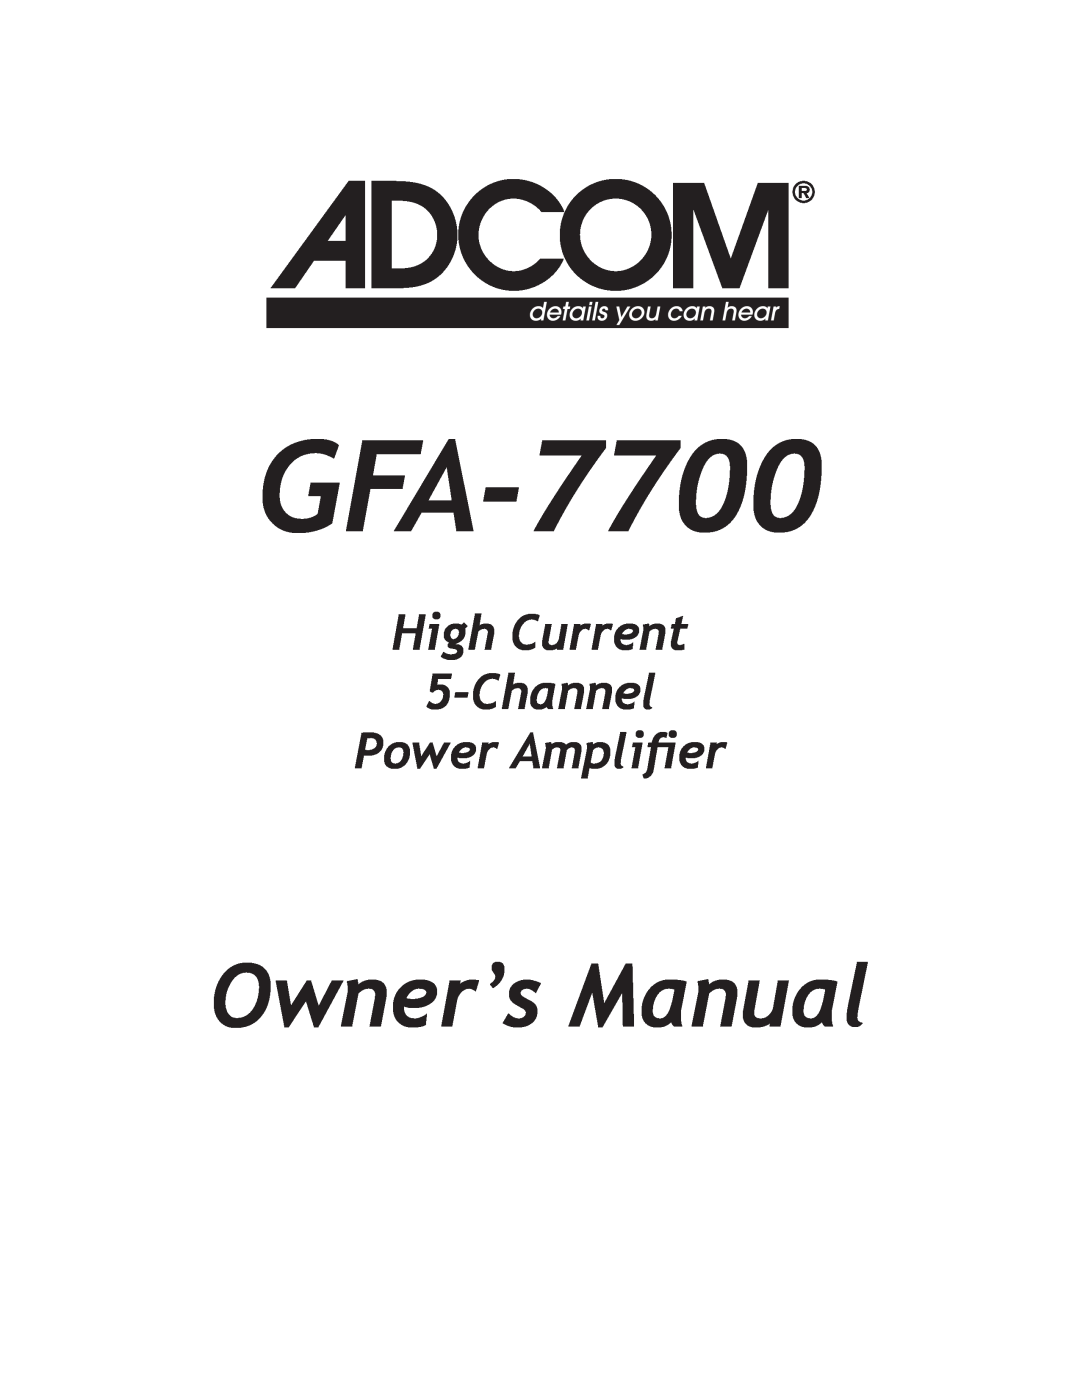 Adcom GFA-7700 owner manual High Current 5-Channel Power Amplifier 